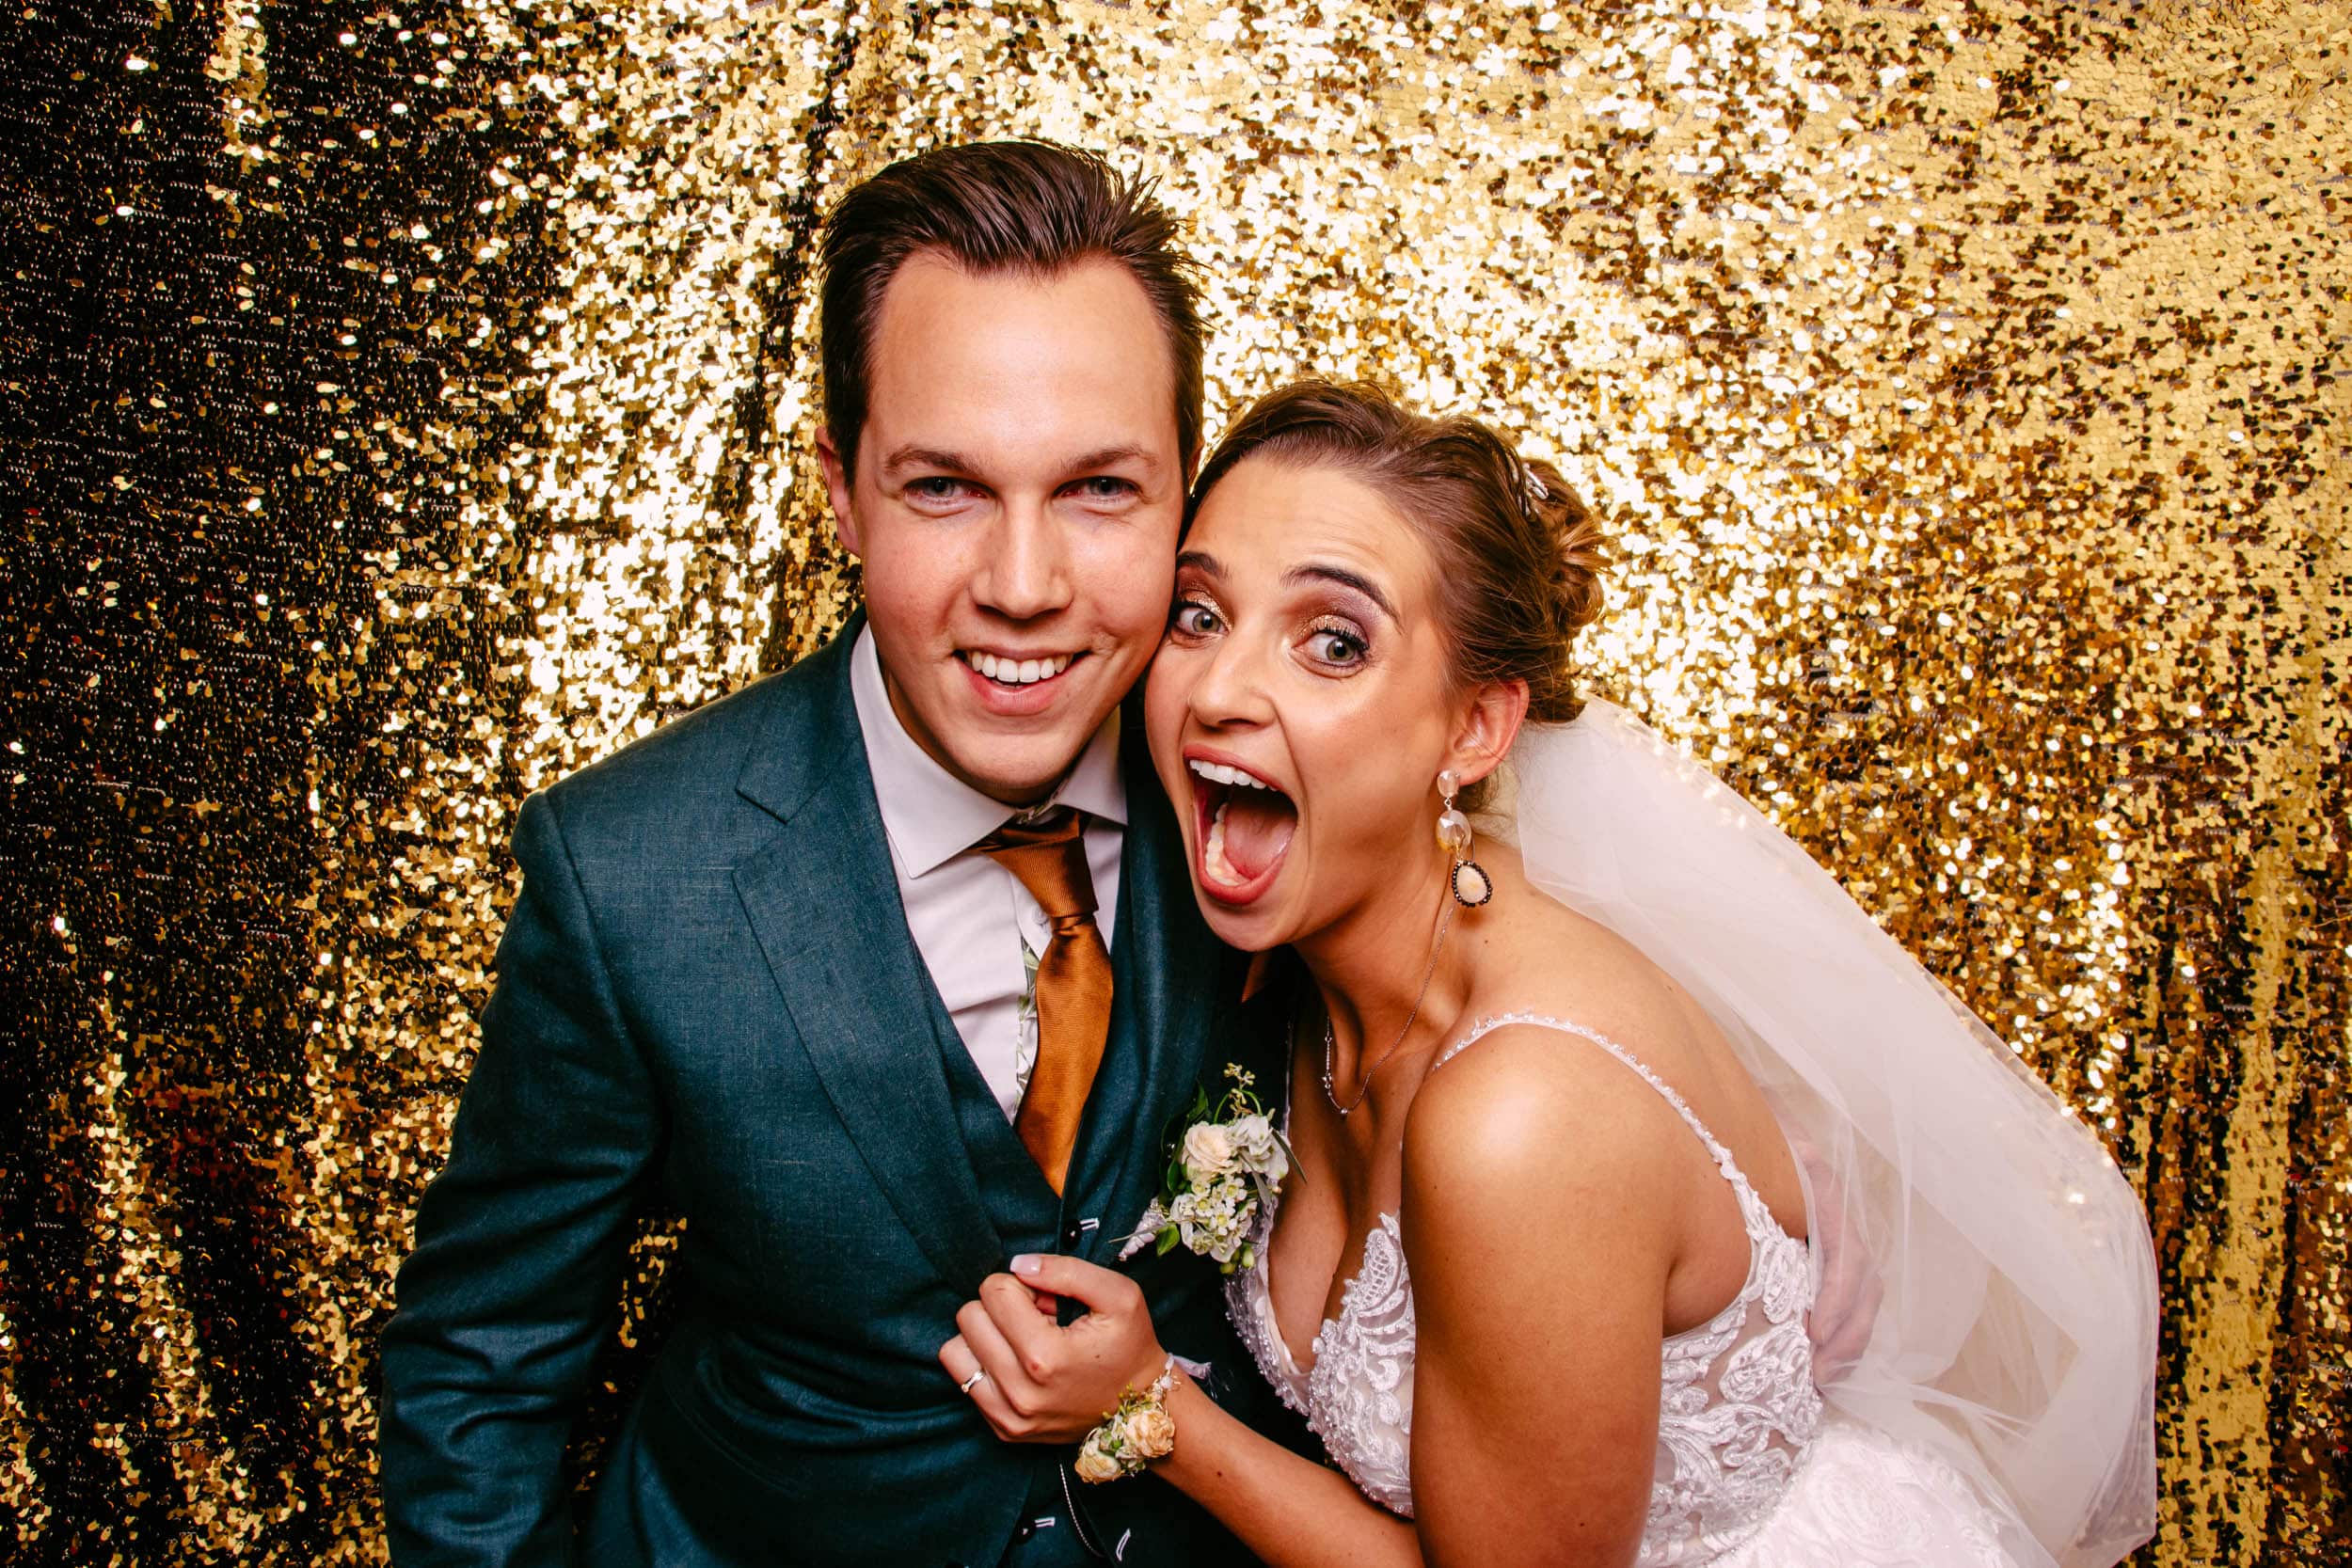 Photobooth hire at your wedding